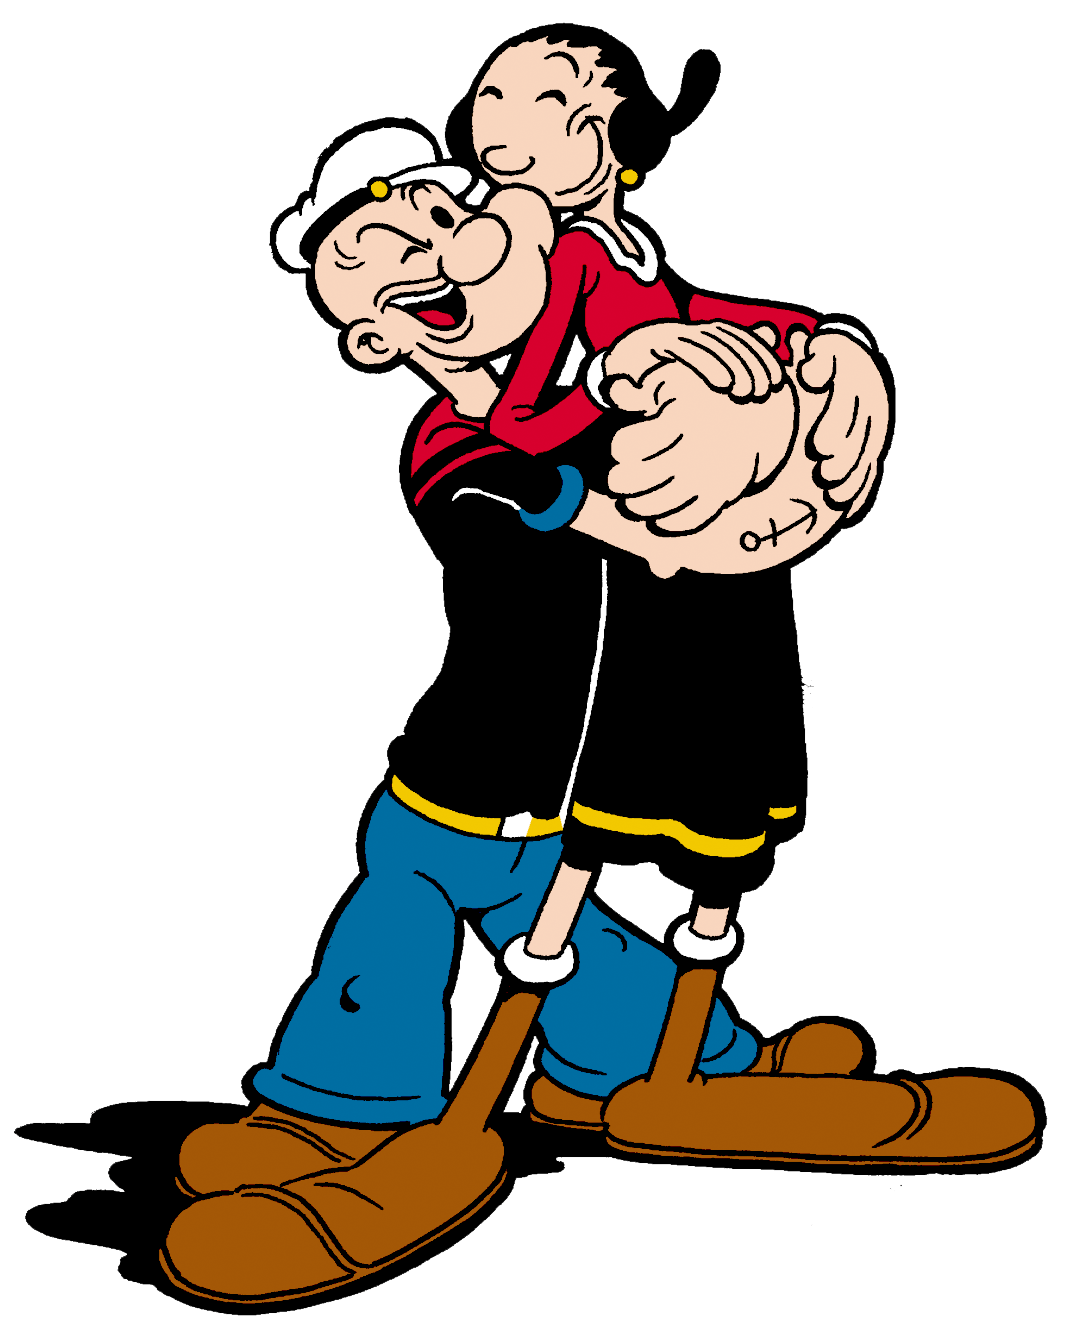 image about popeye. Cartoon, Spinach